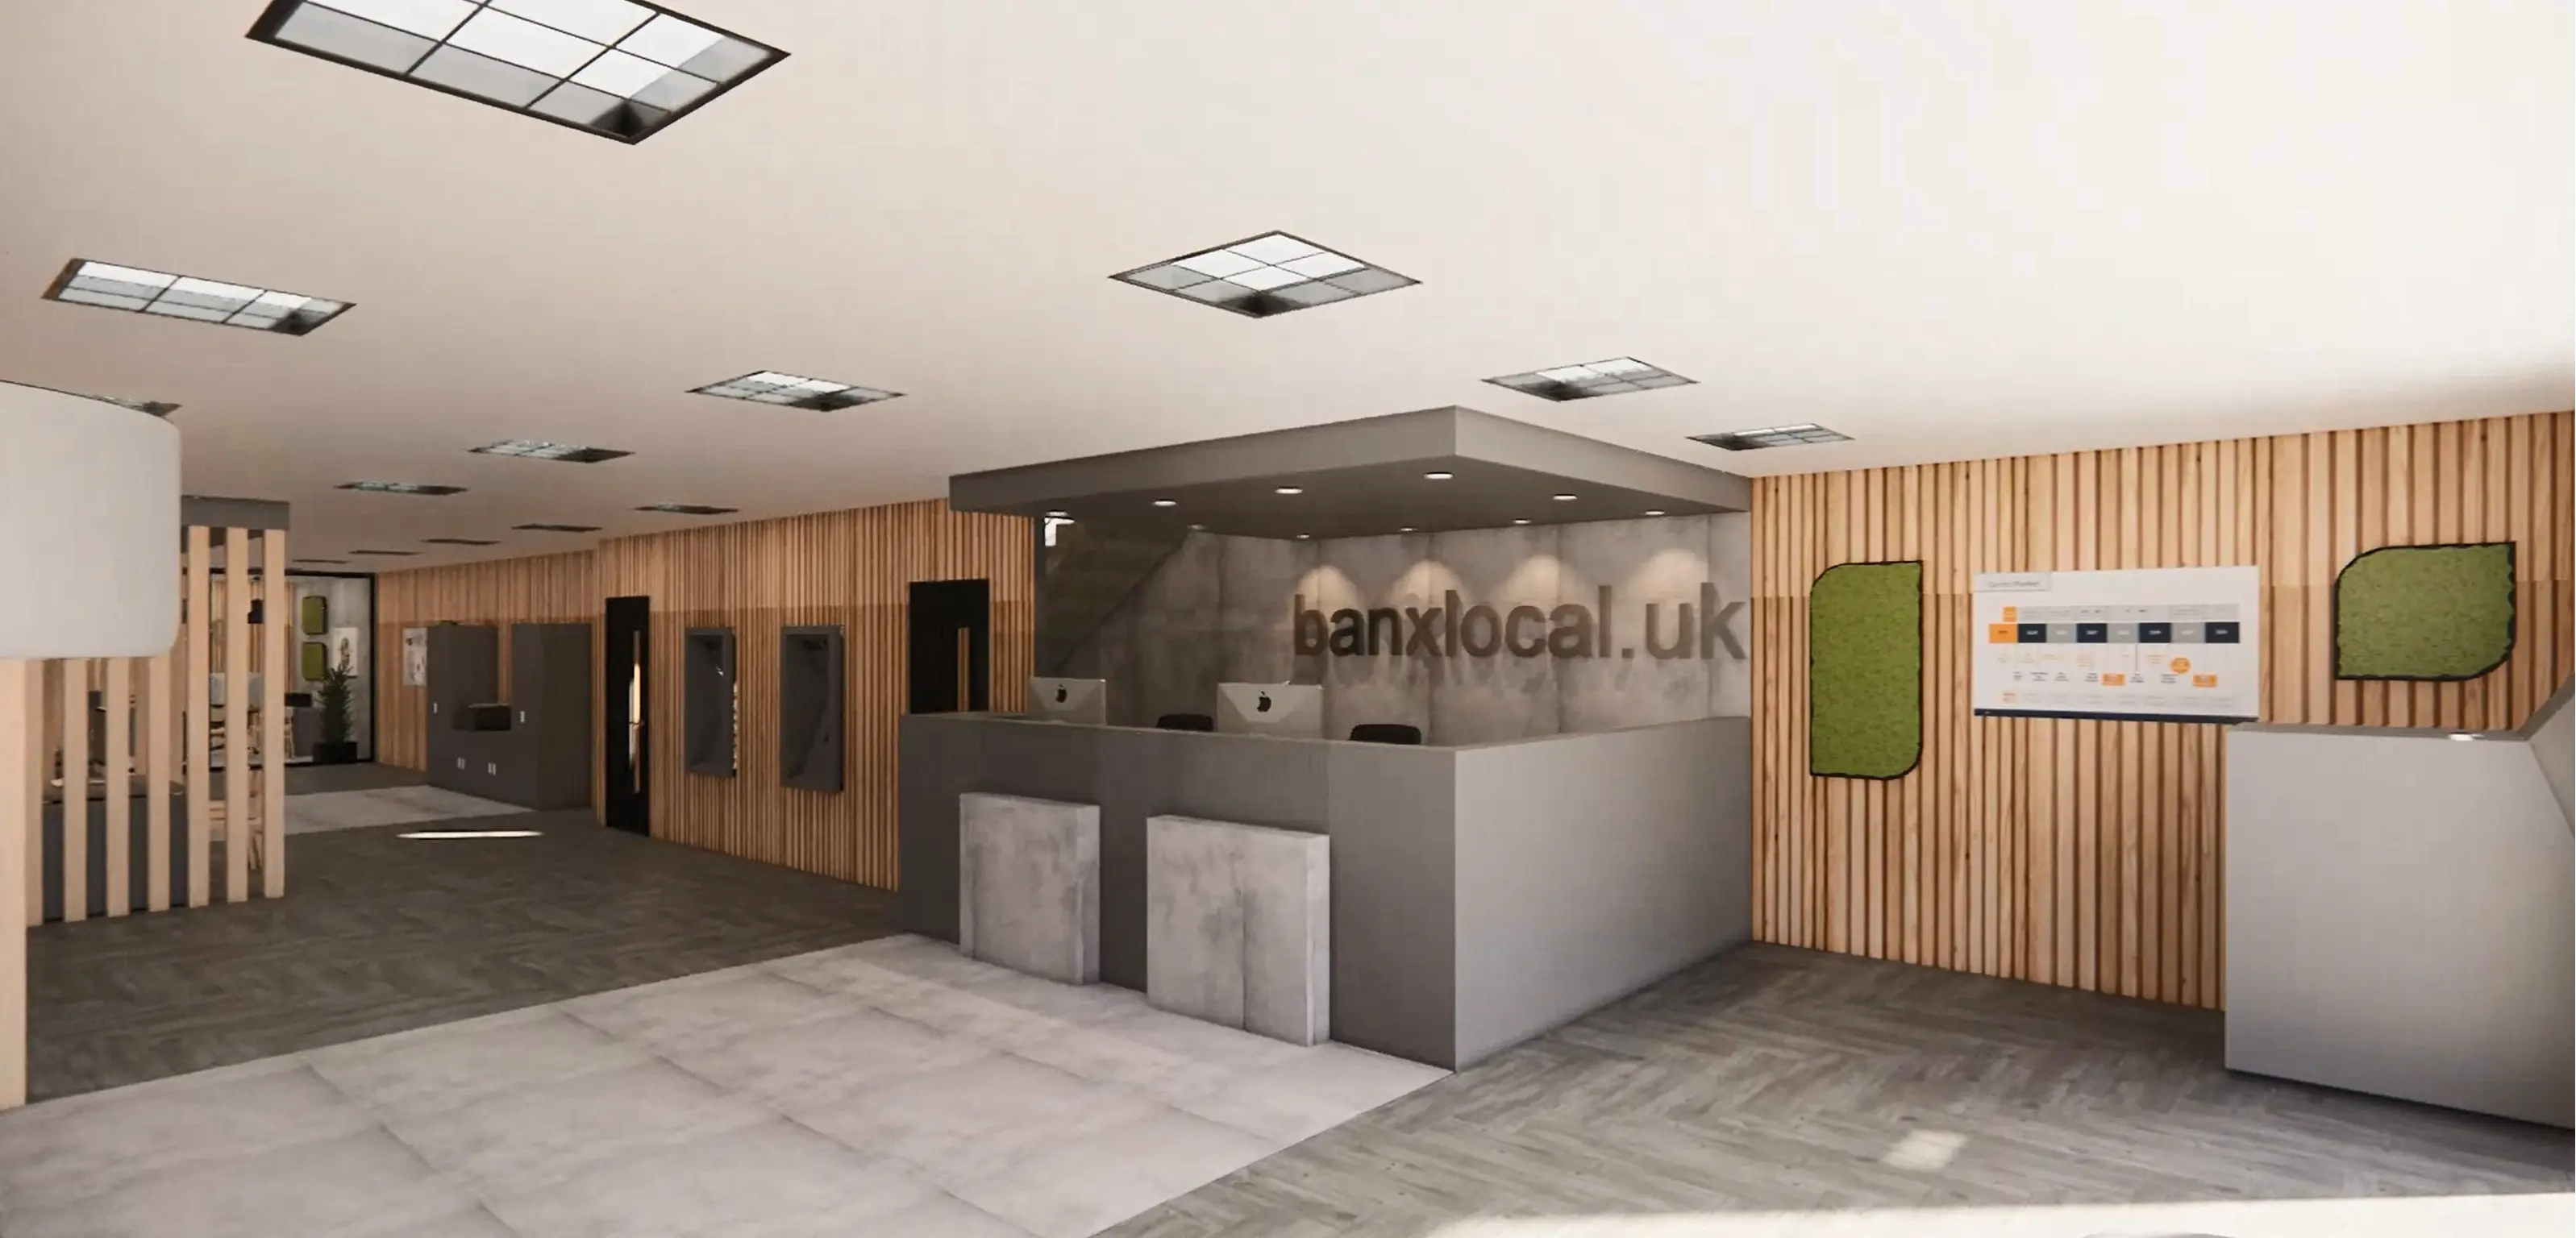 Banxlocal.uk Branch